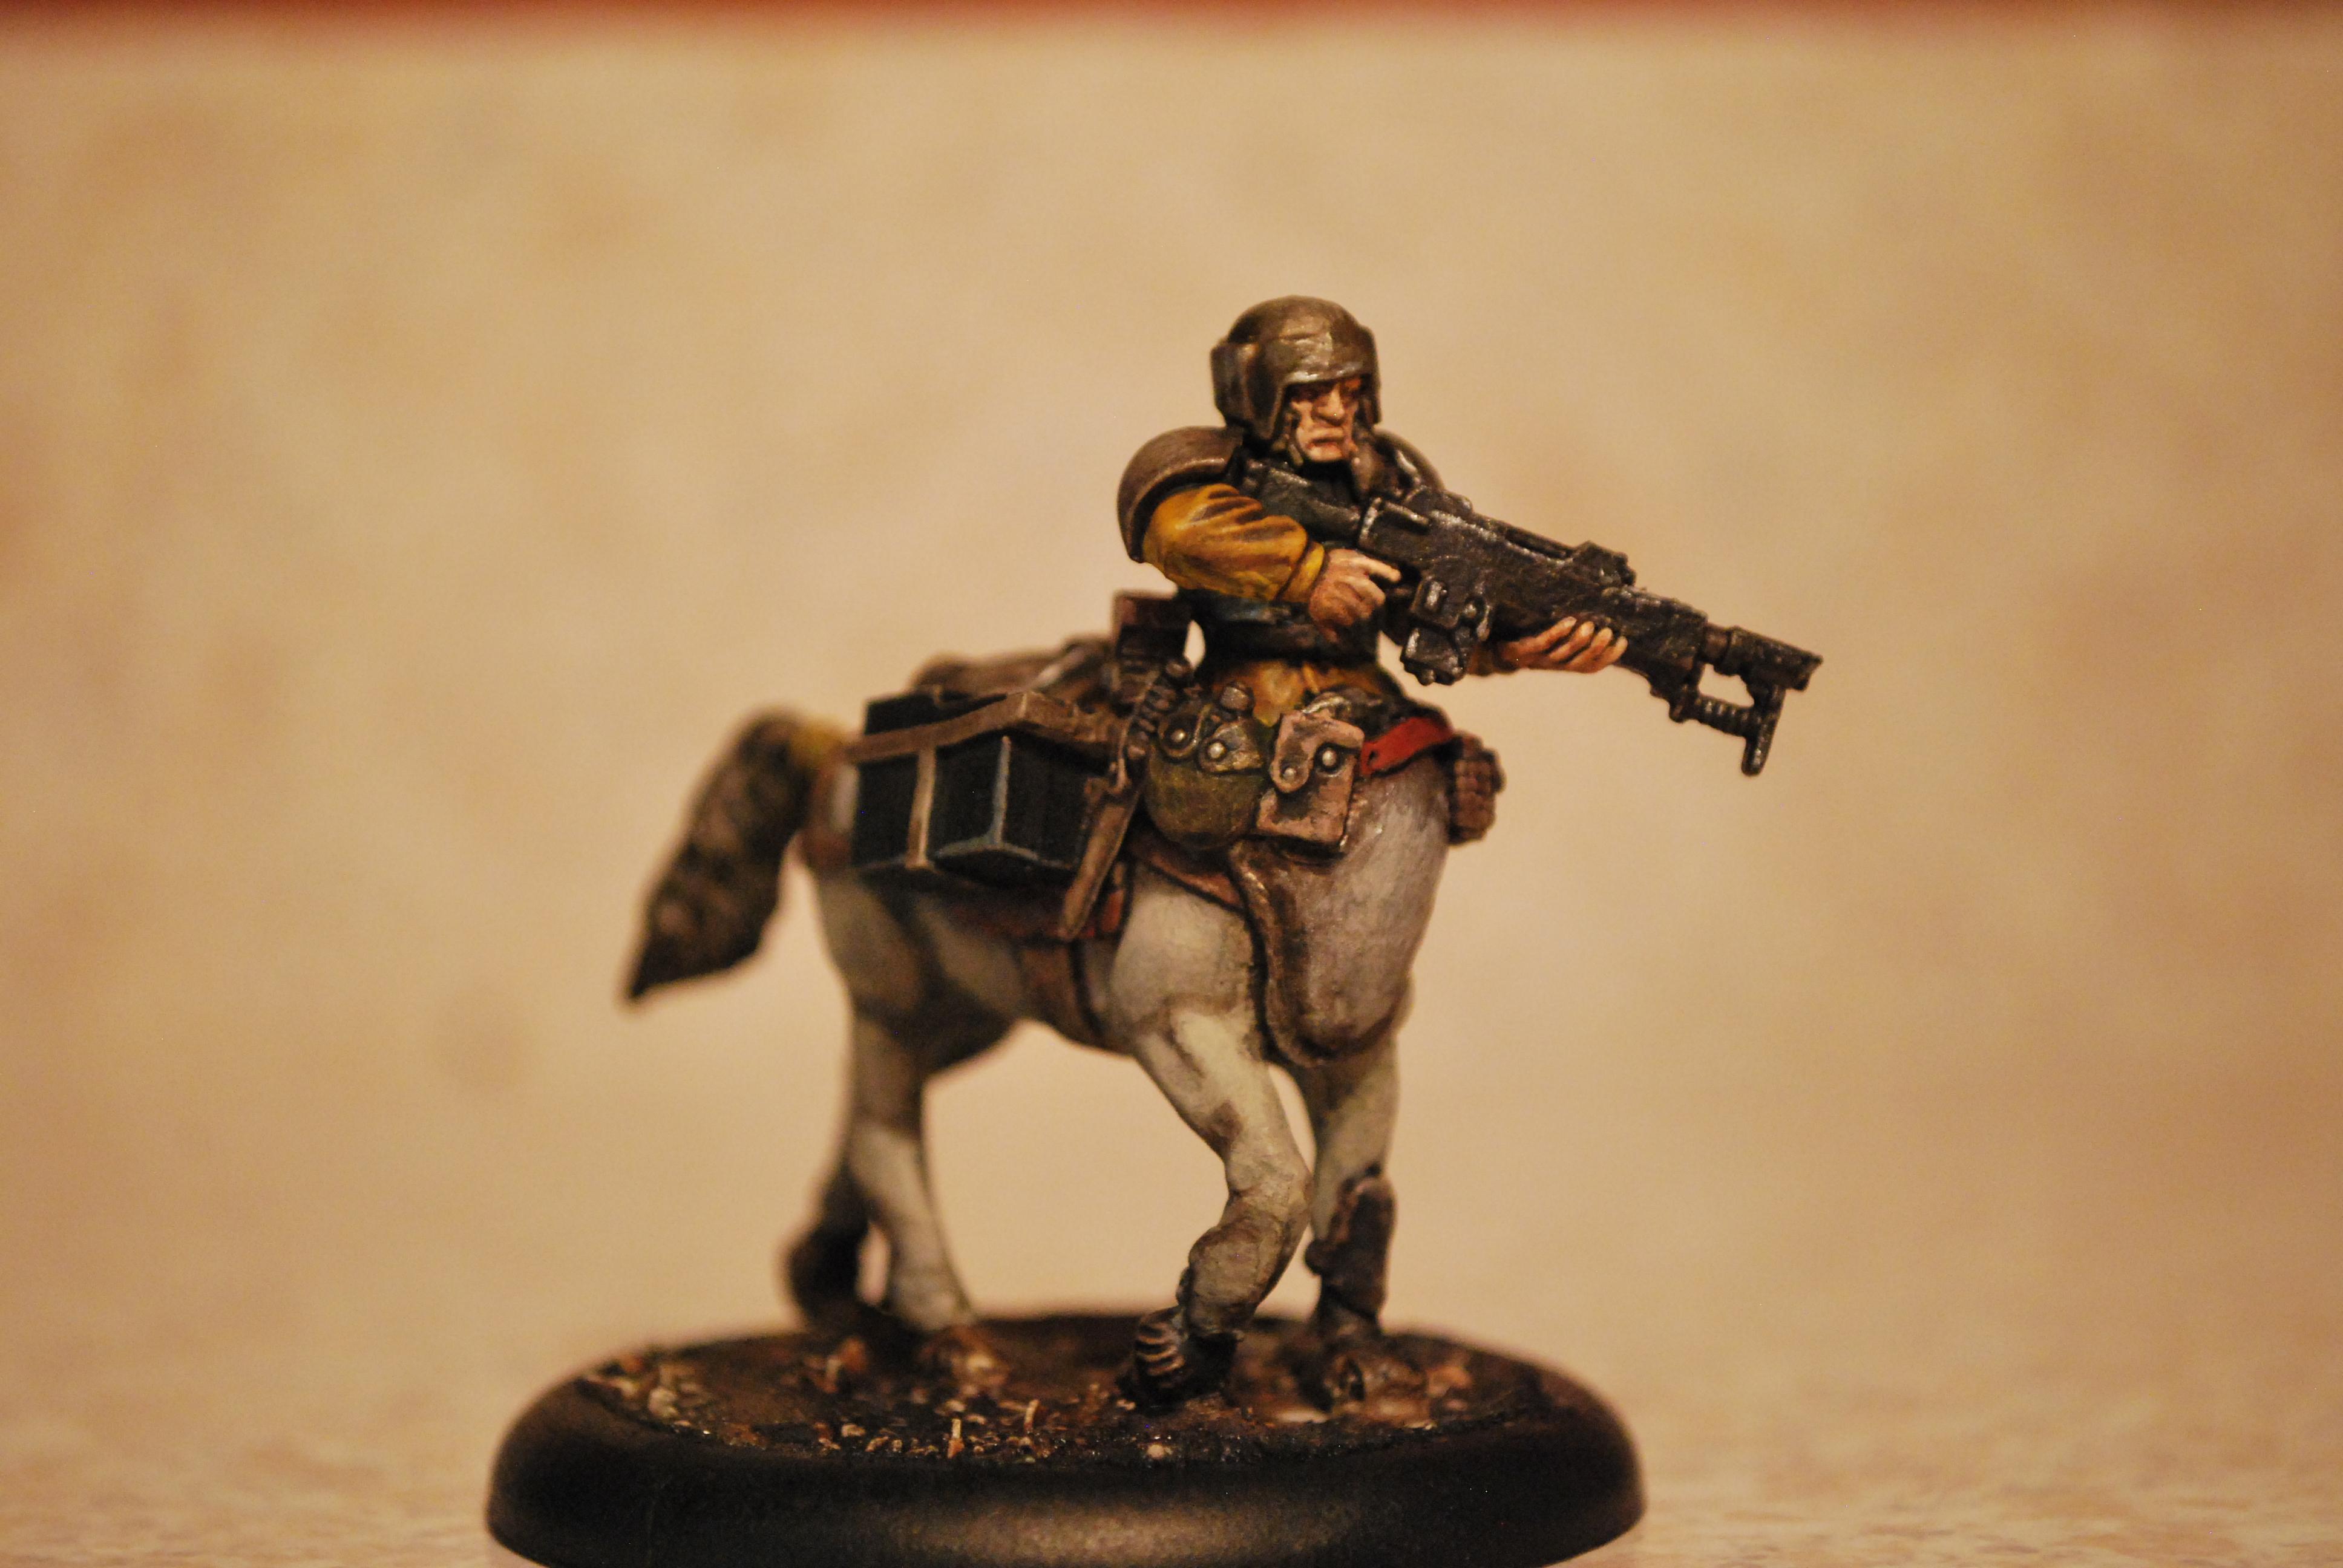 Centaur, Conversion, Custom, Empire, Fallout, Horse, Imperial Guard, Mutant, Plus, Post Apoc, Post Apocalyptic, Pro-create, Sculpting, Soldier, This Is Not A Test